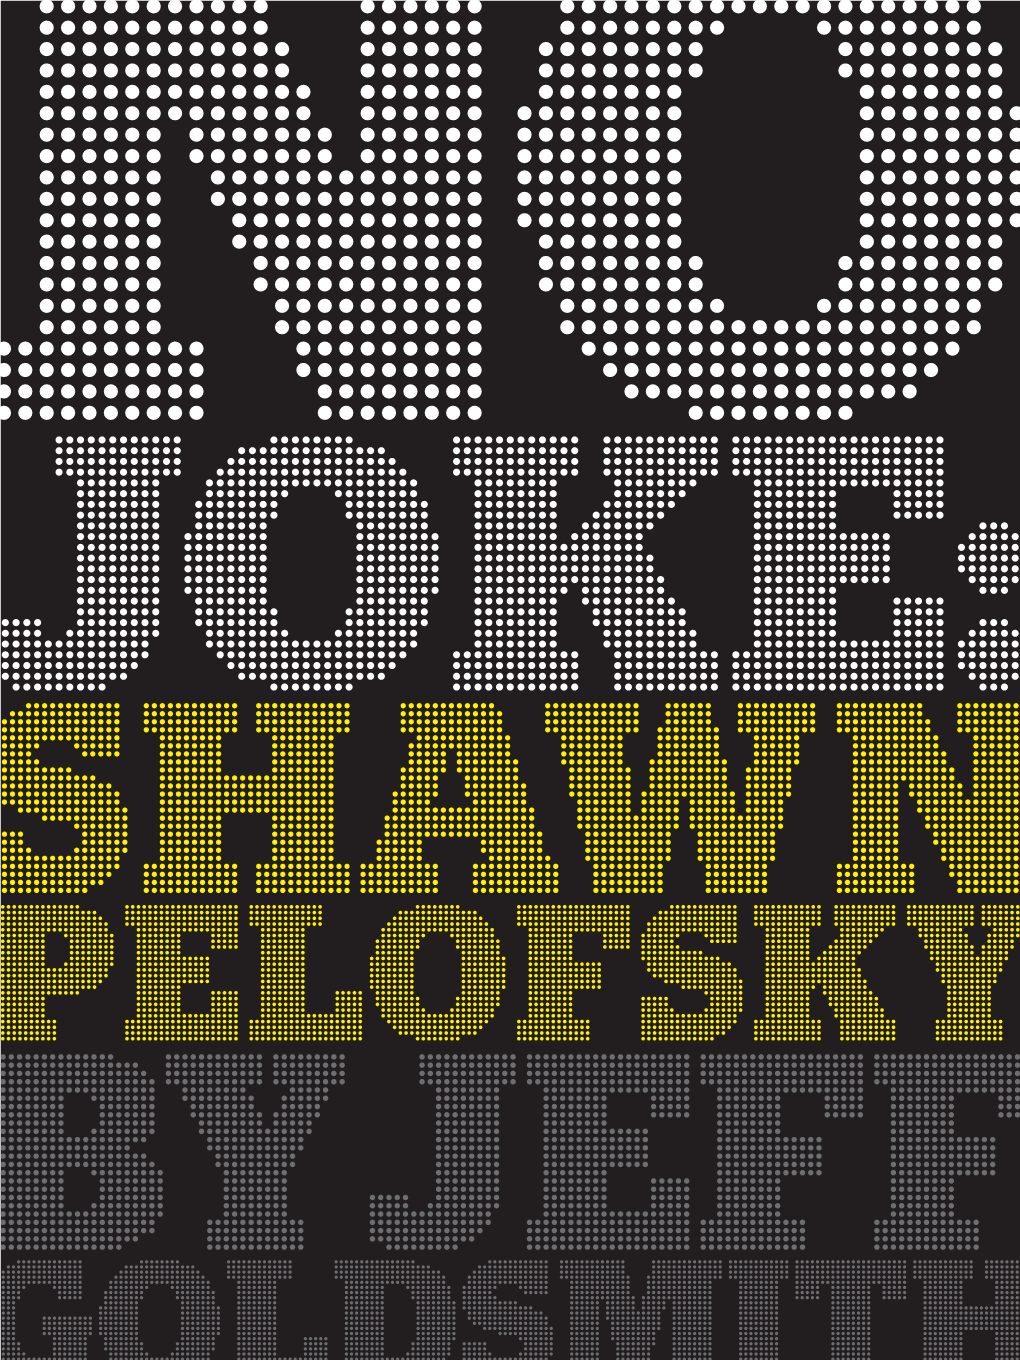 Check out Two Tracks from Shawn Pelofsky's “Lada Haha” Comedy